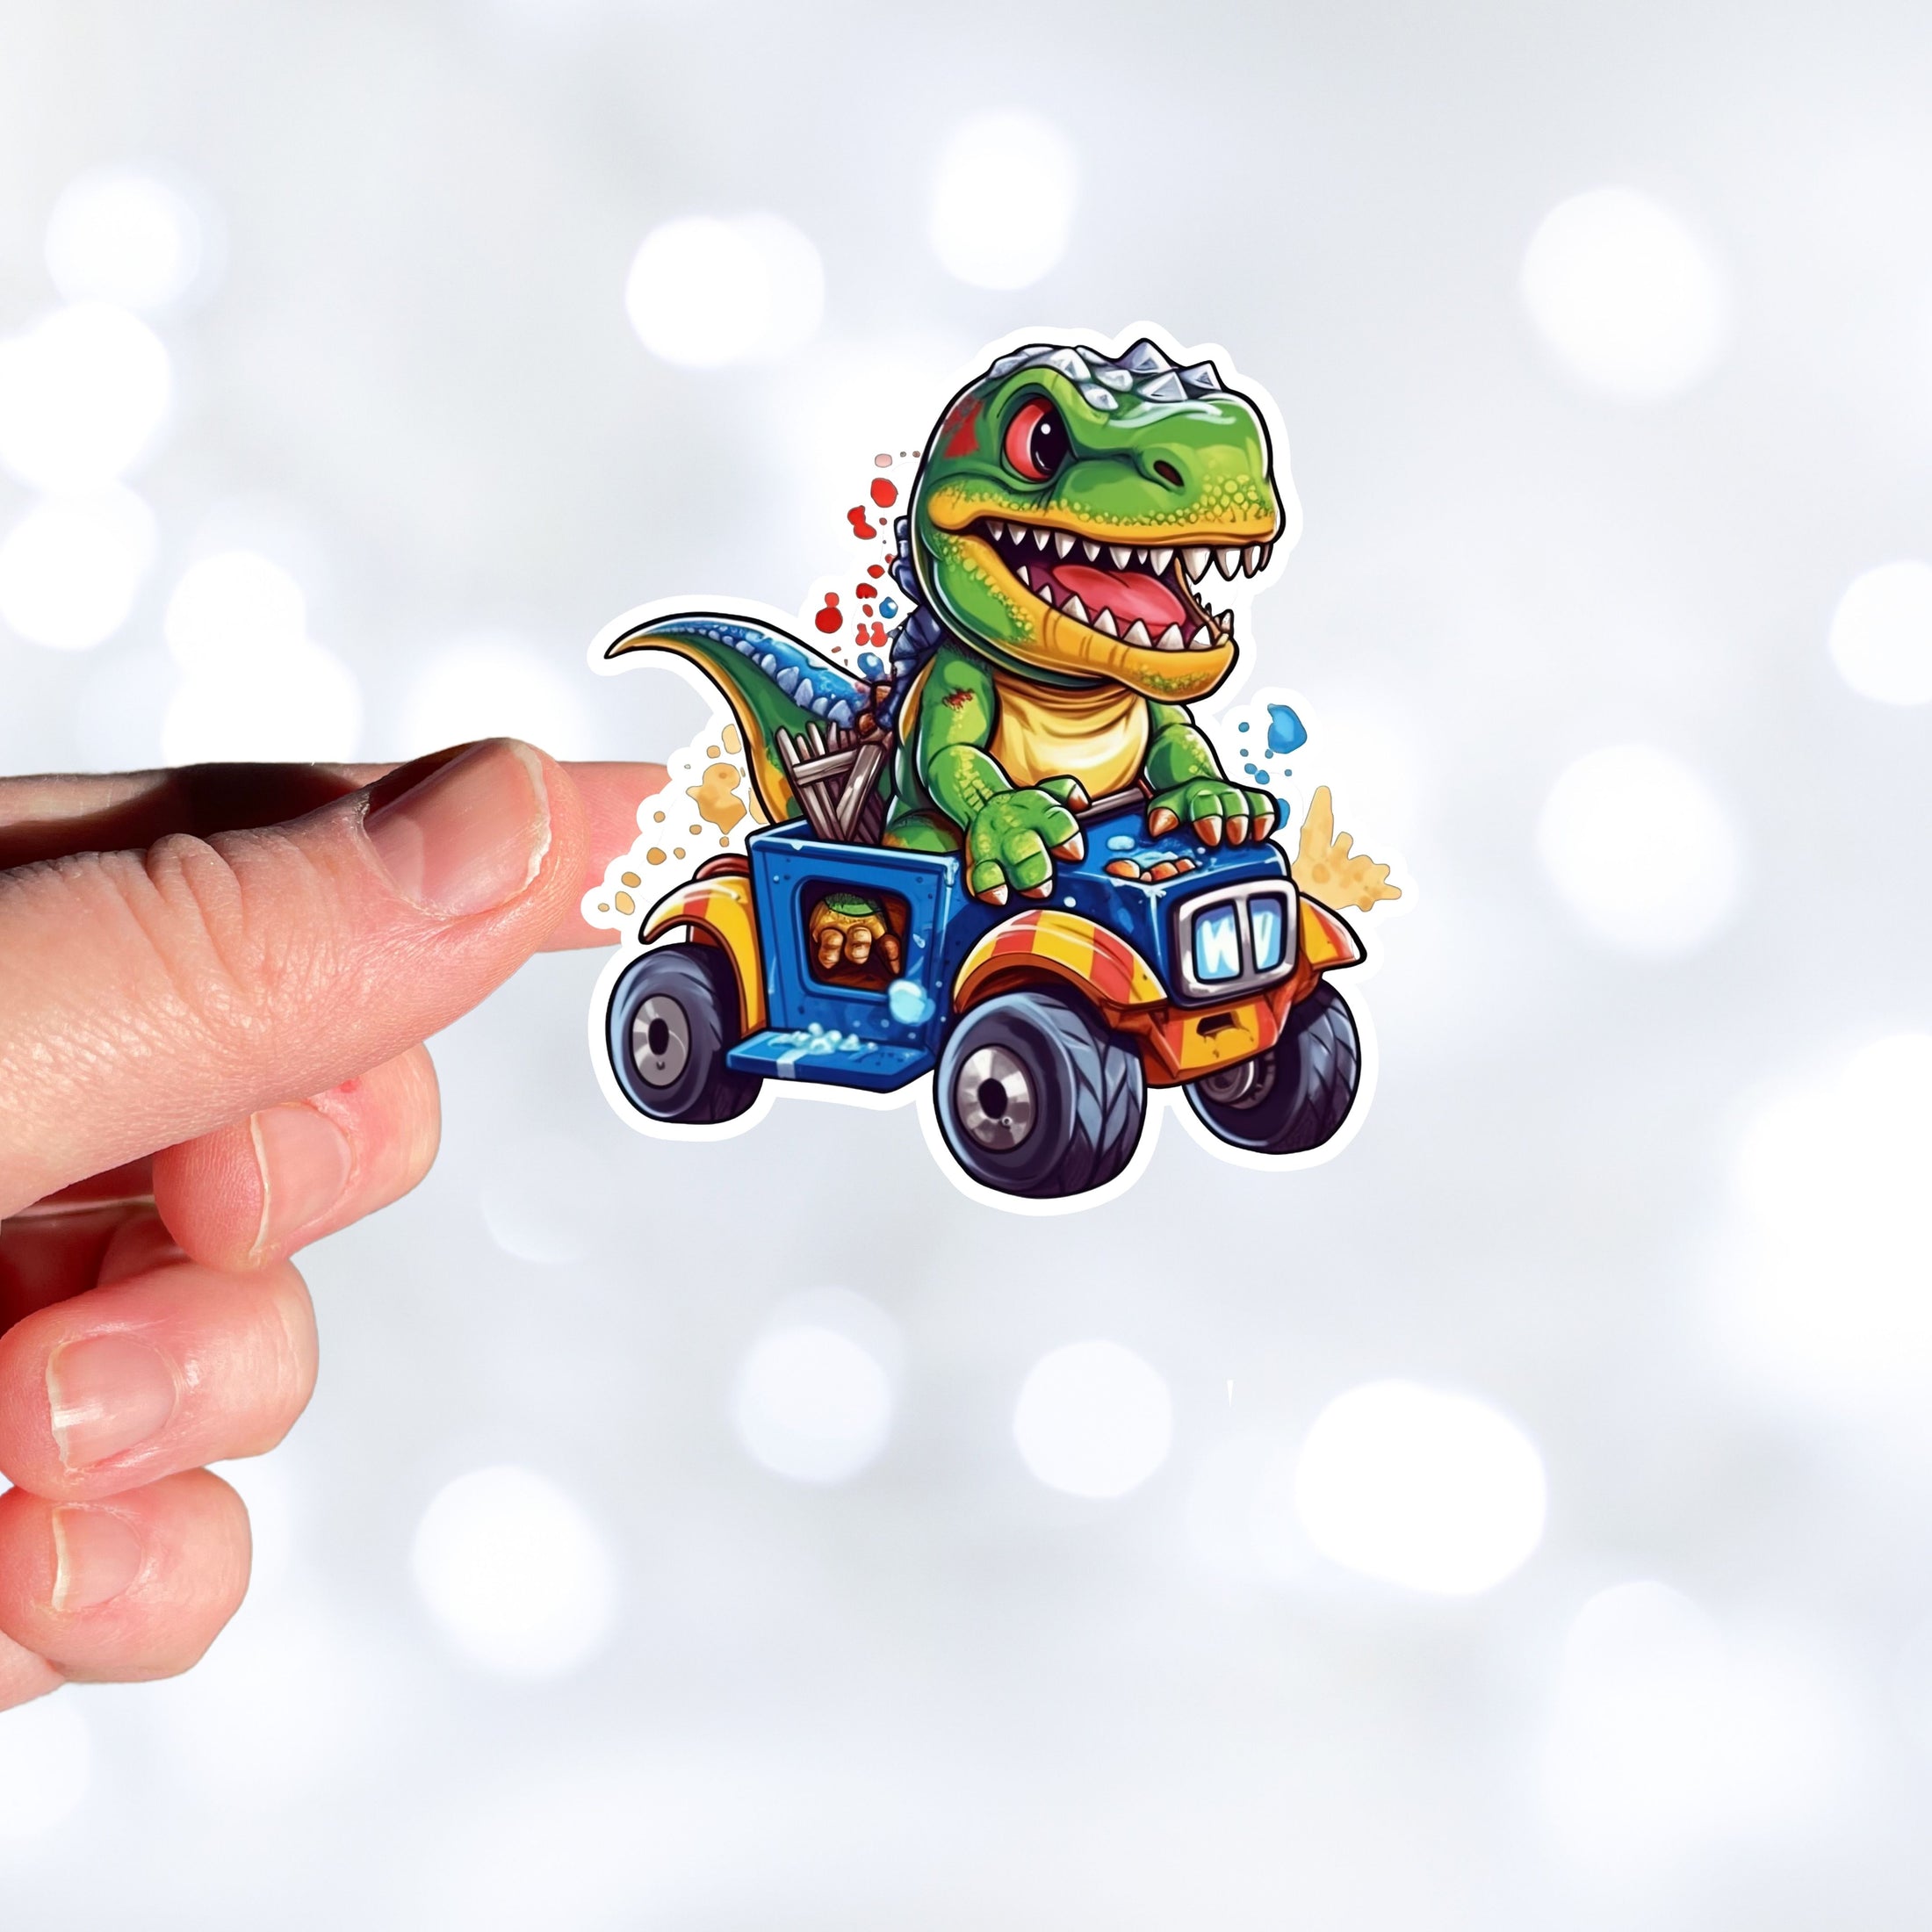 This image shows a hand holding the dino on ATV sticker.